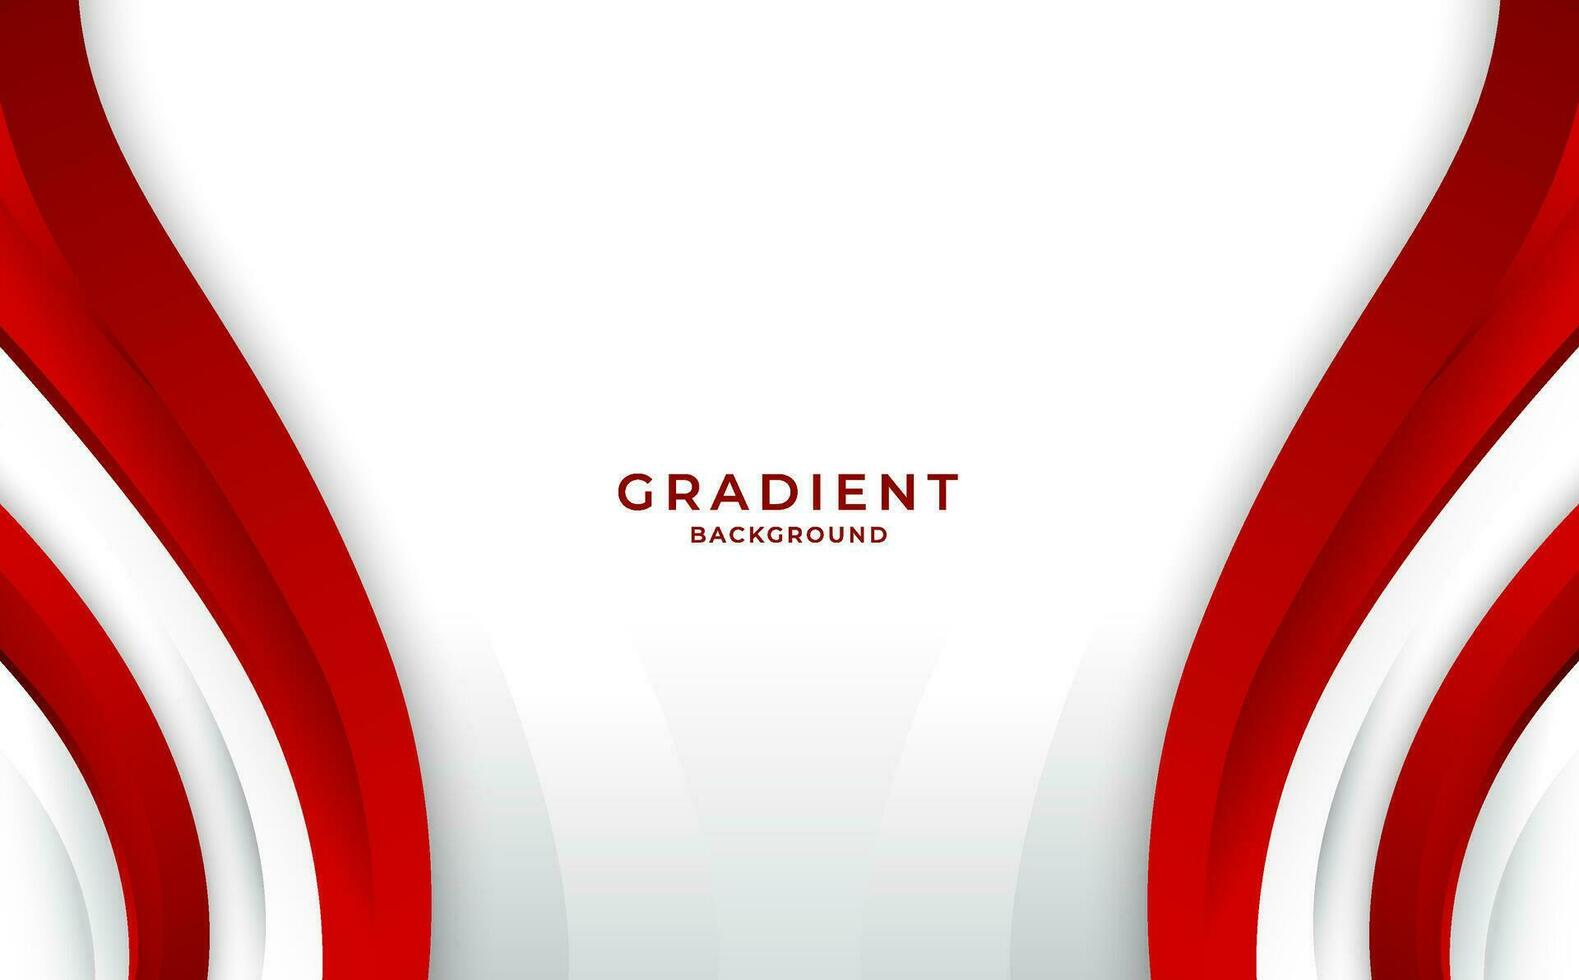 red and white indonesia background concept illustration vector